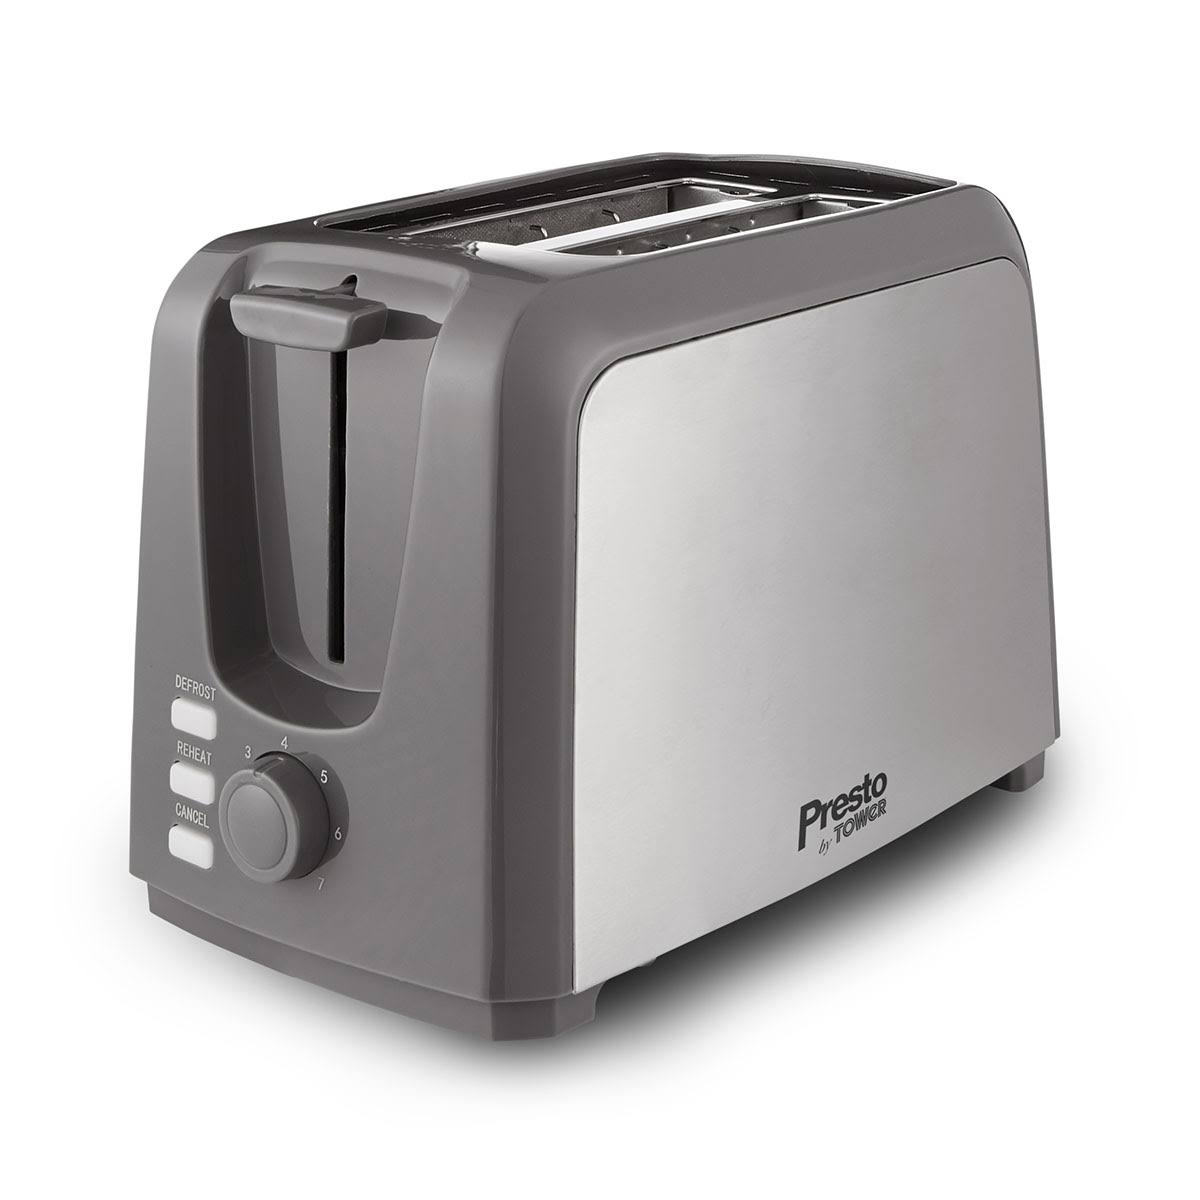 Tower PT20057 Presto 2 Slice Toaster - Brushed Stainless Steel